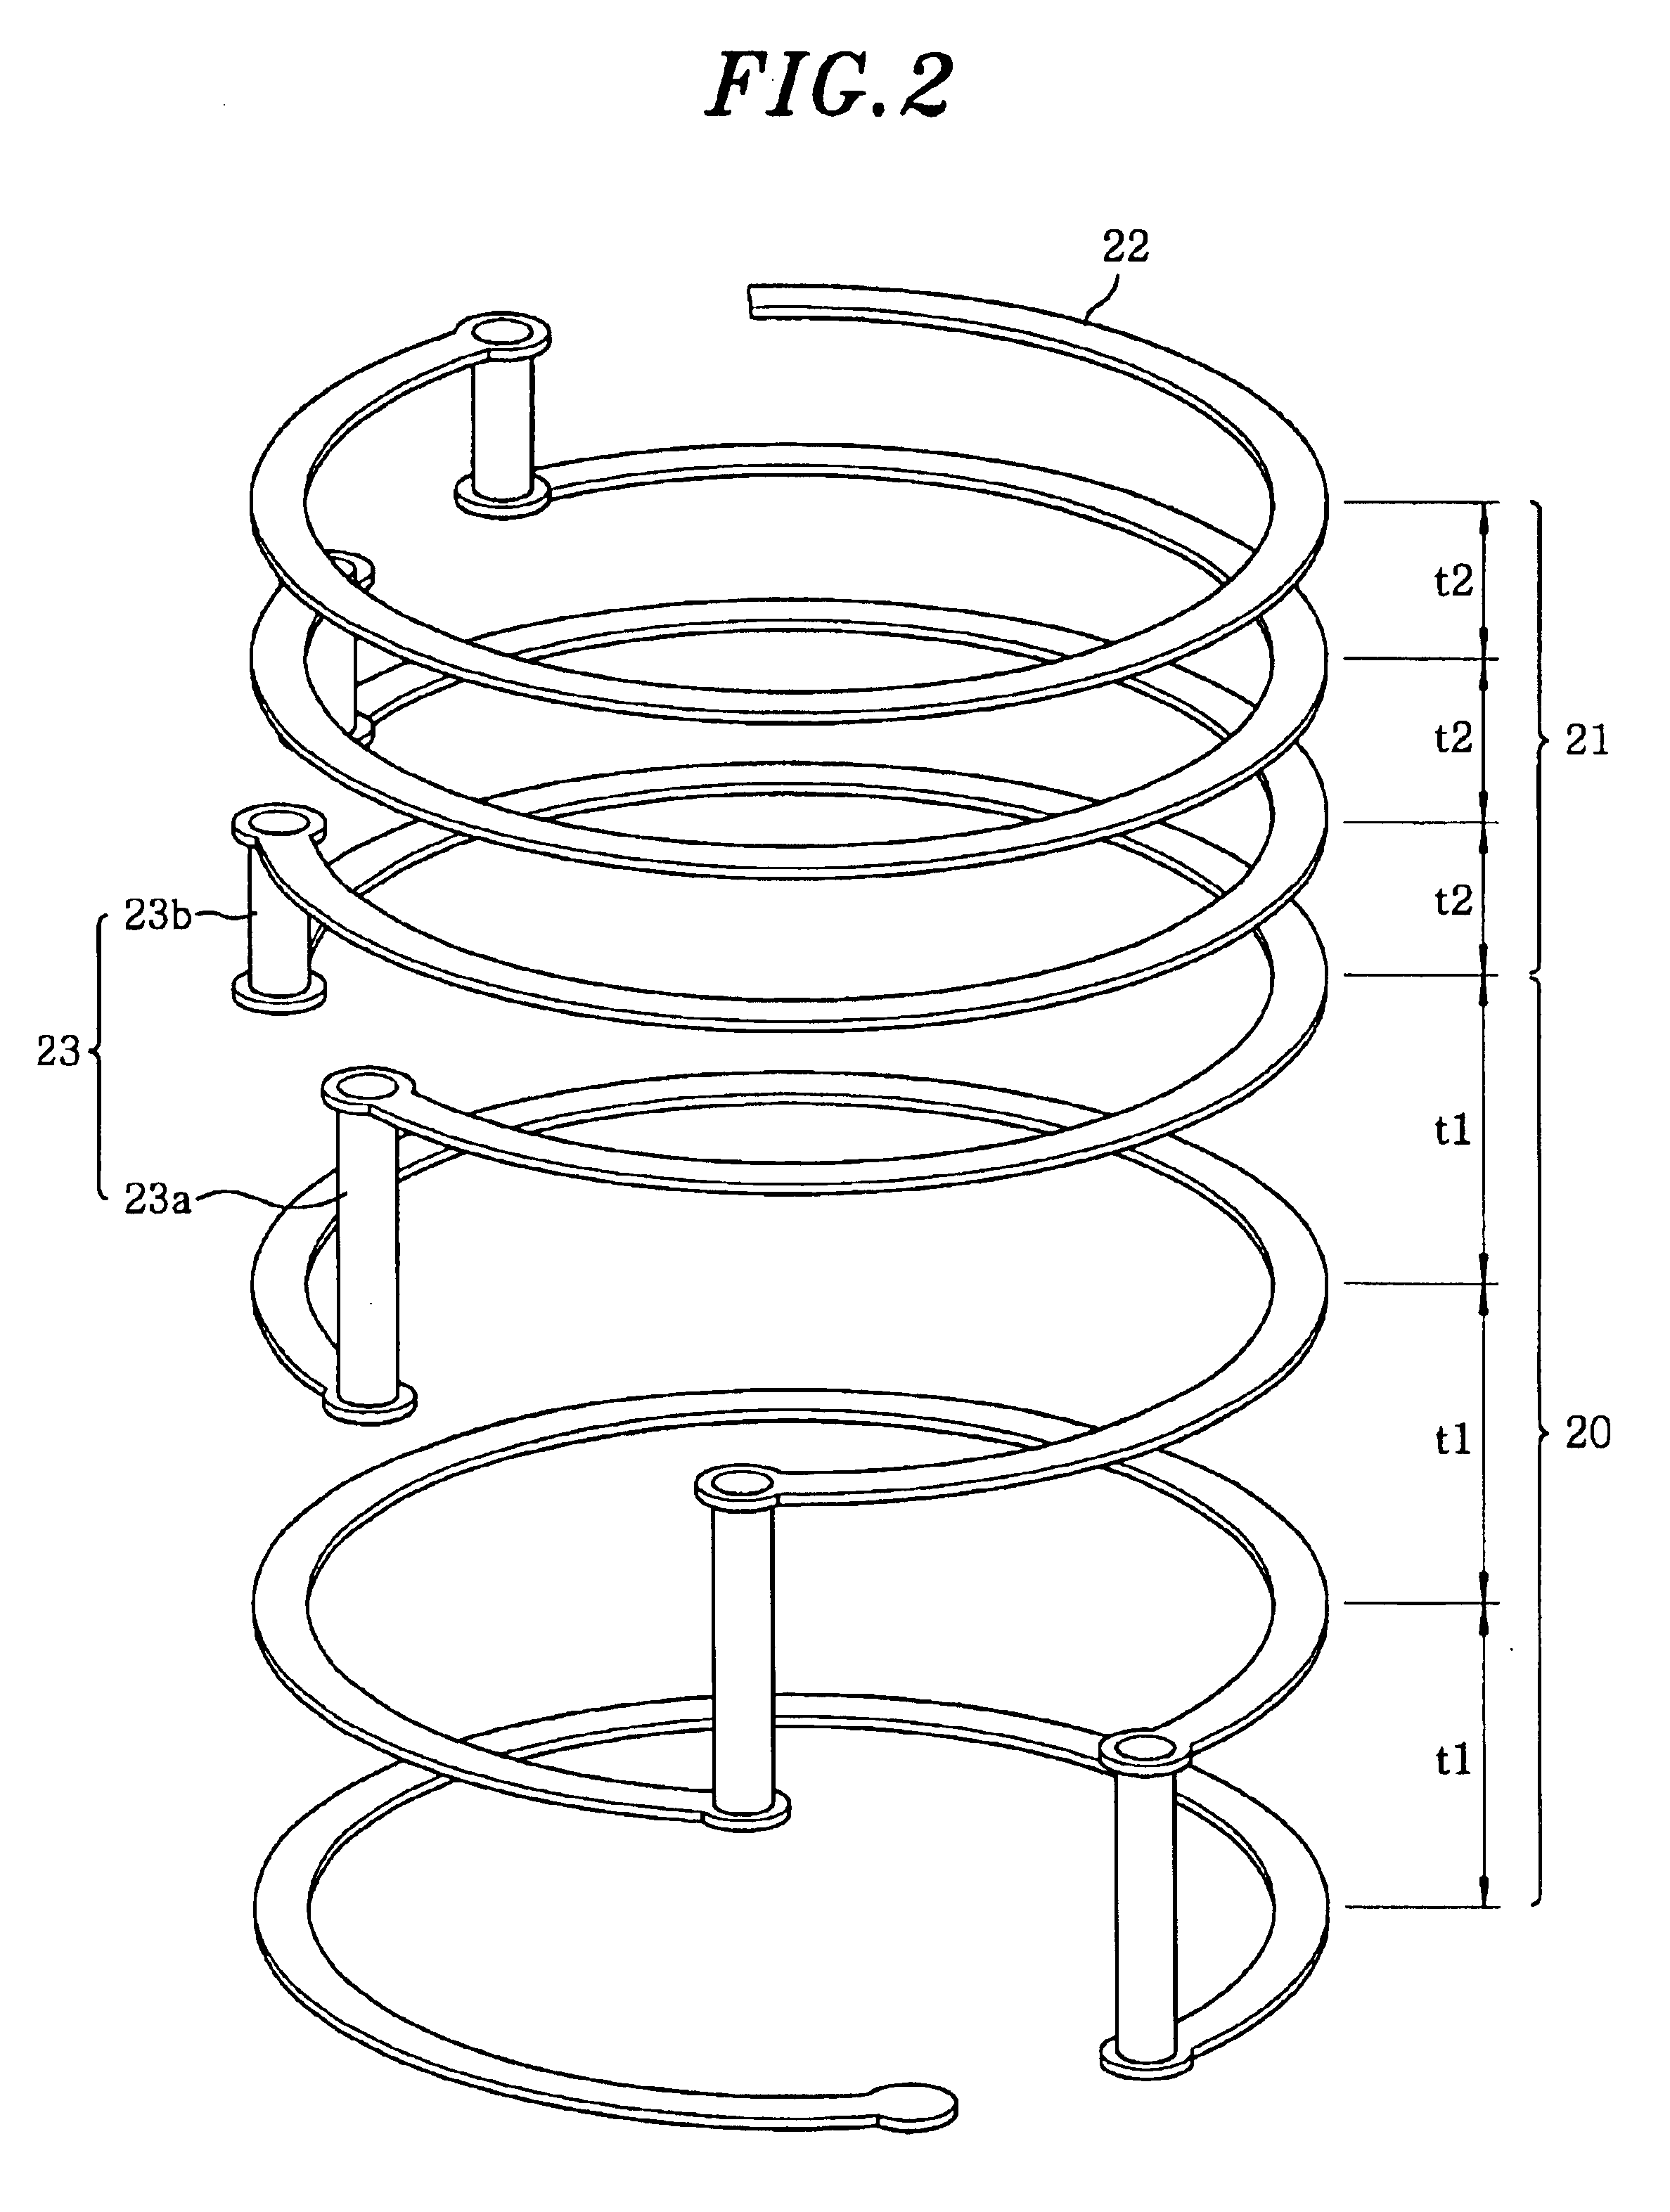 Multi-band helical antenna